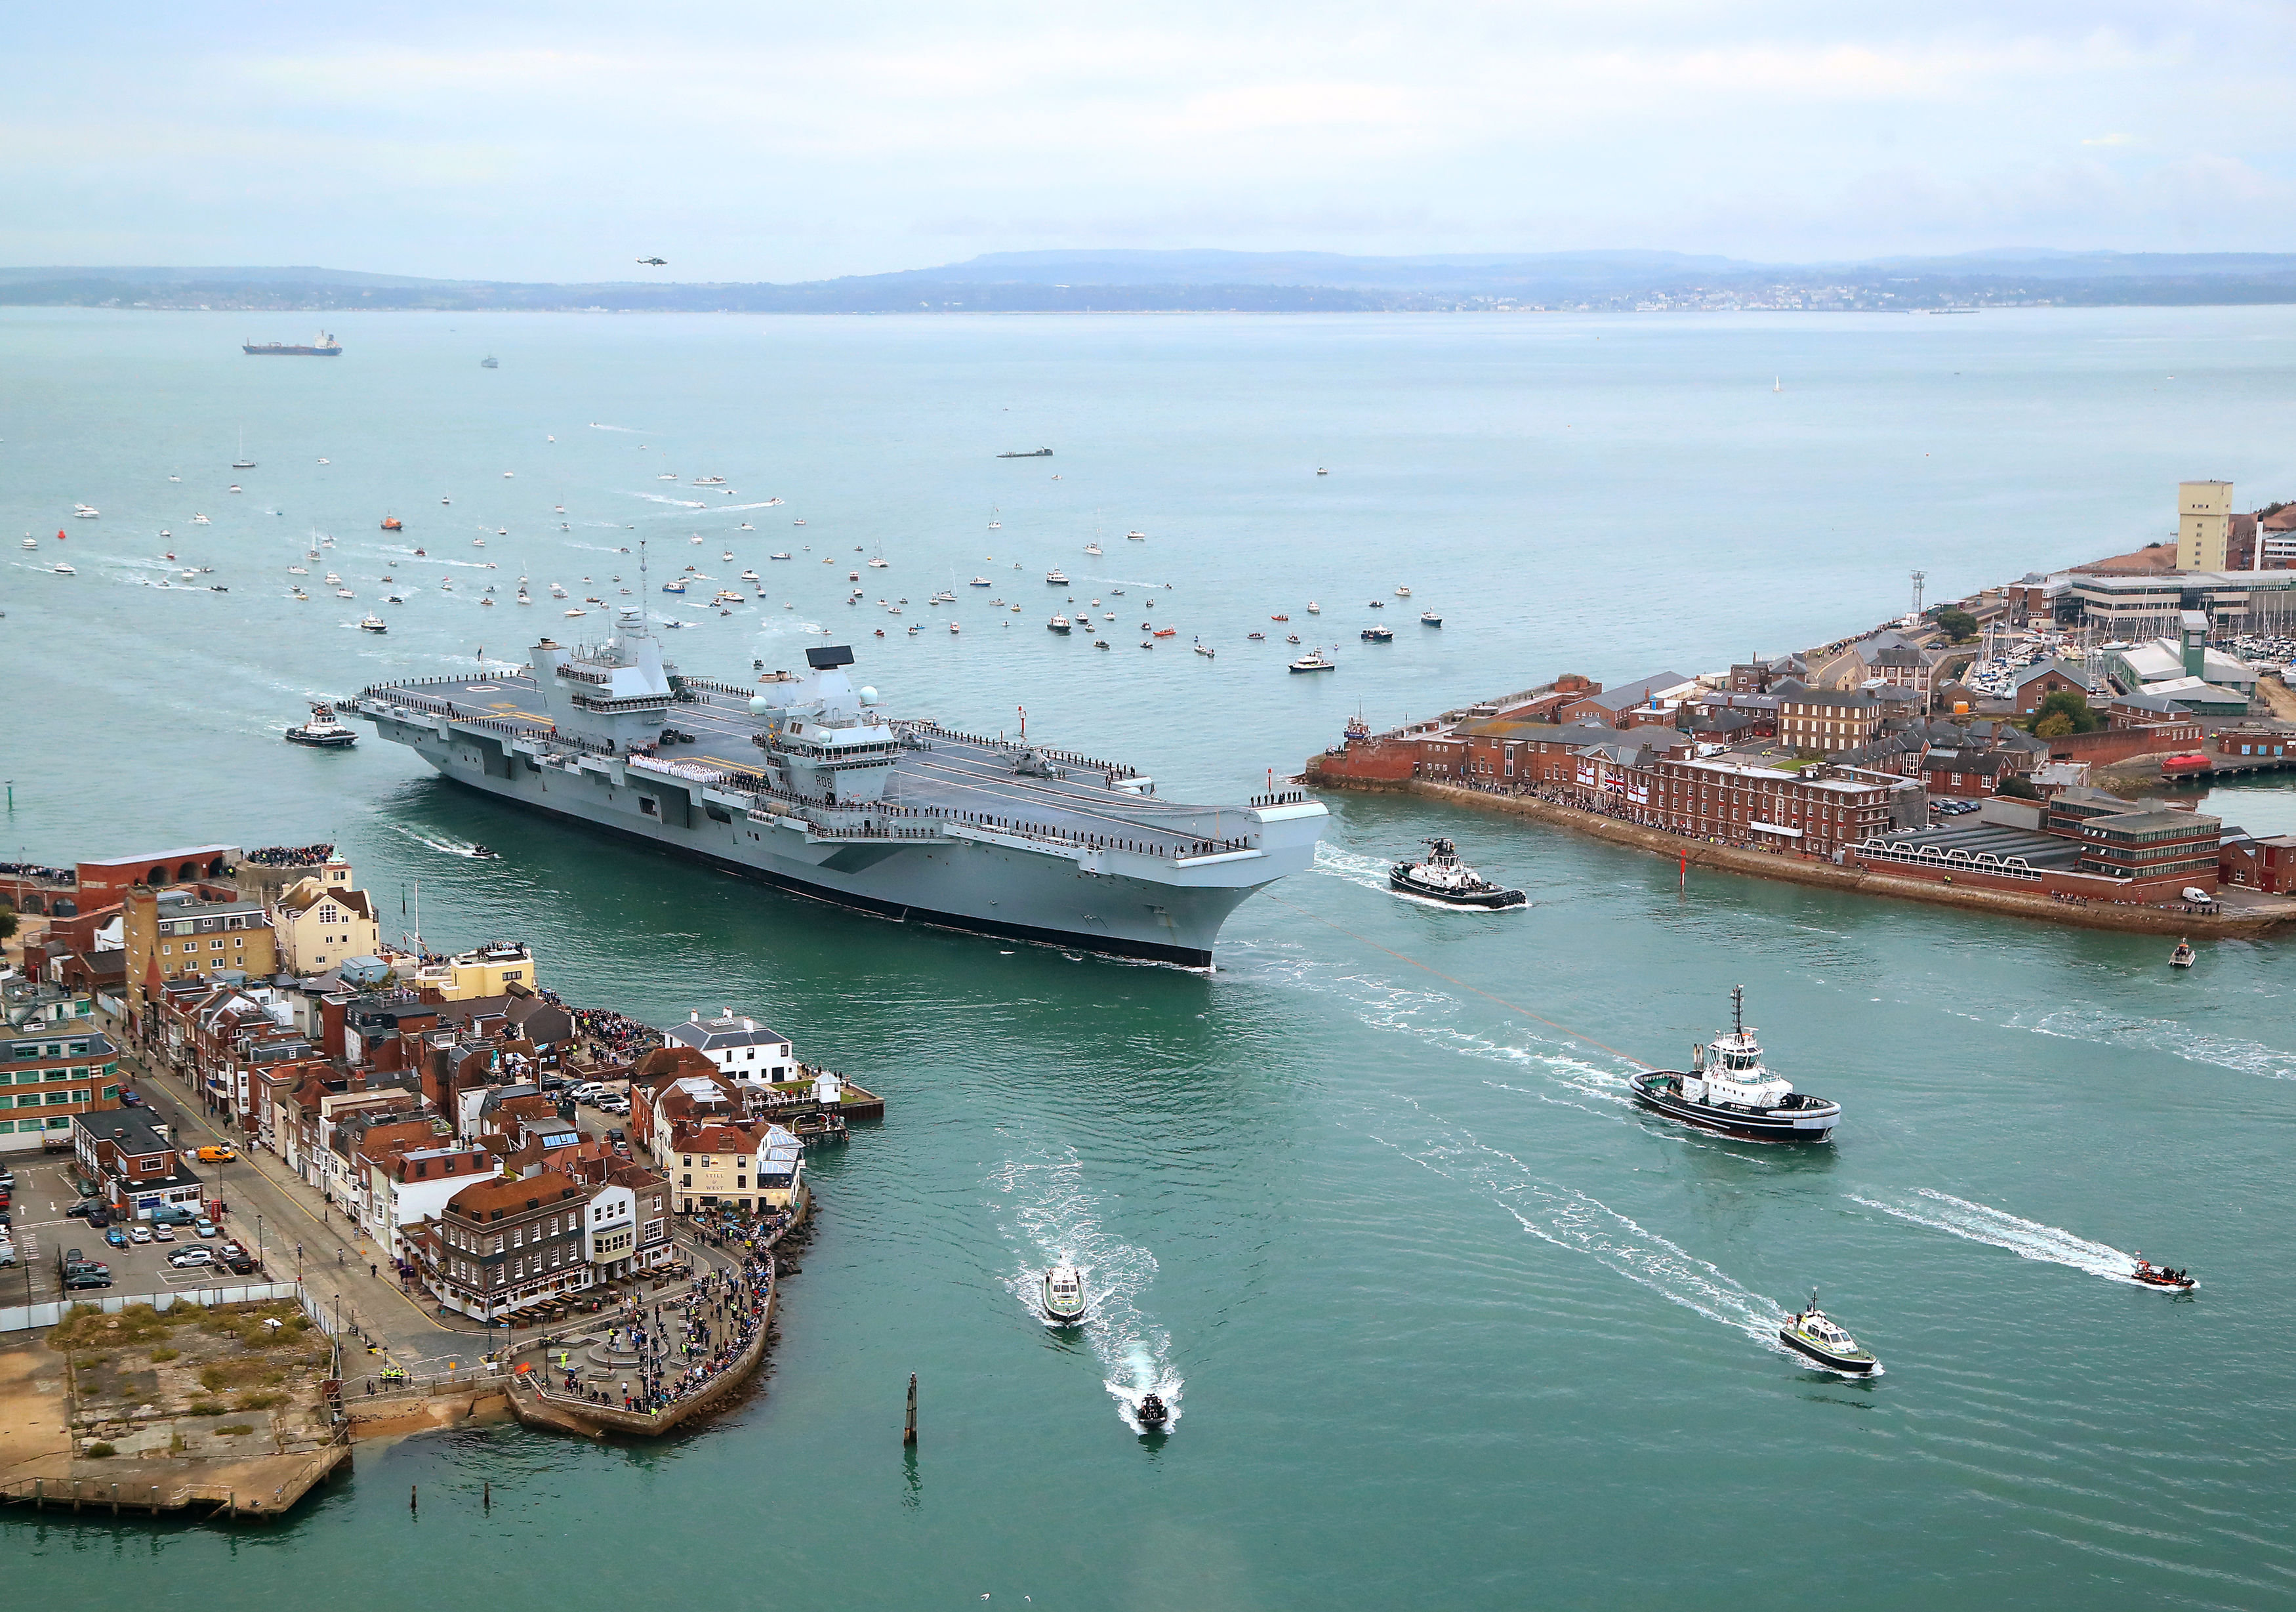 The 65,000-tonne HMS Queen Elizabeth is the largest warship ever built in Britain